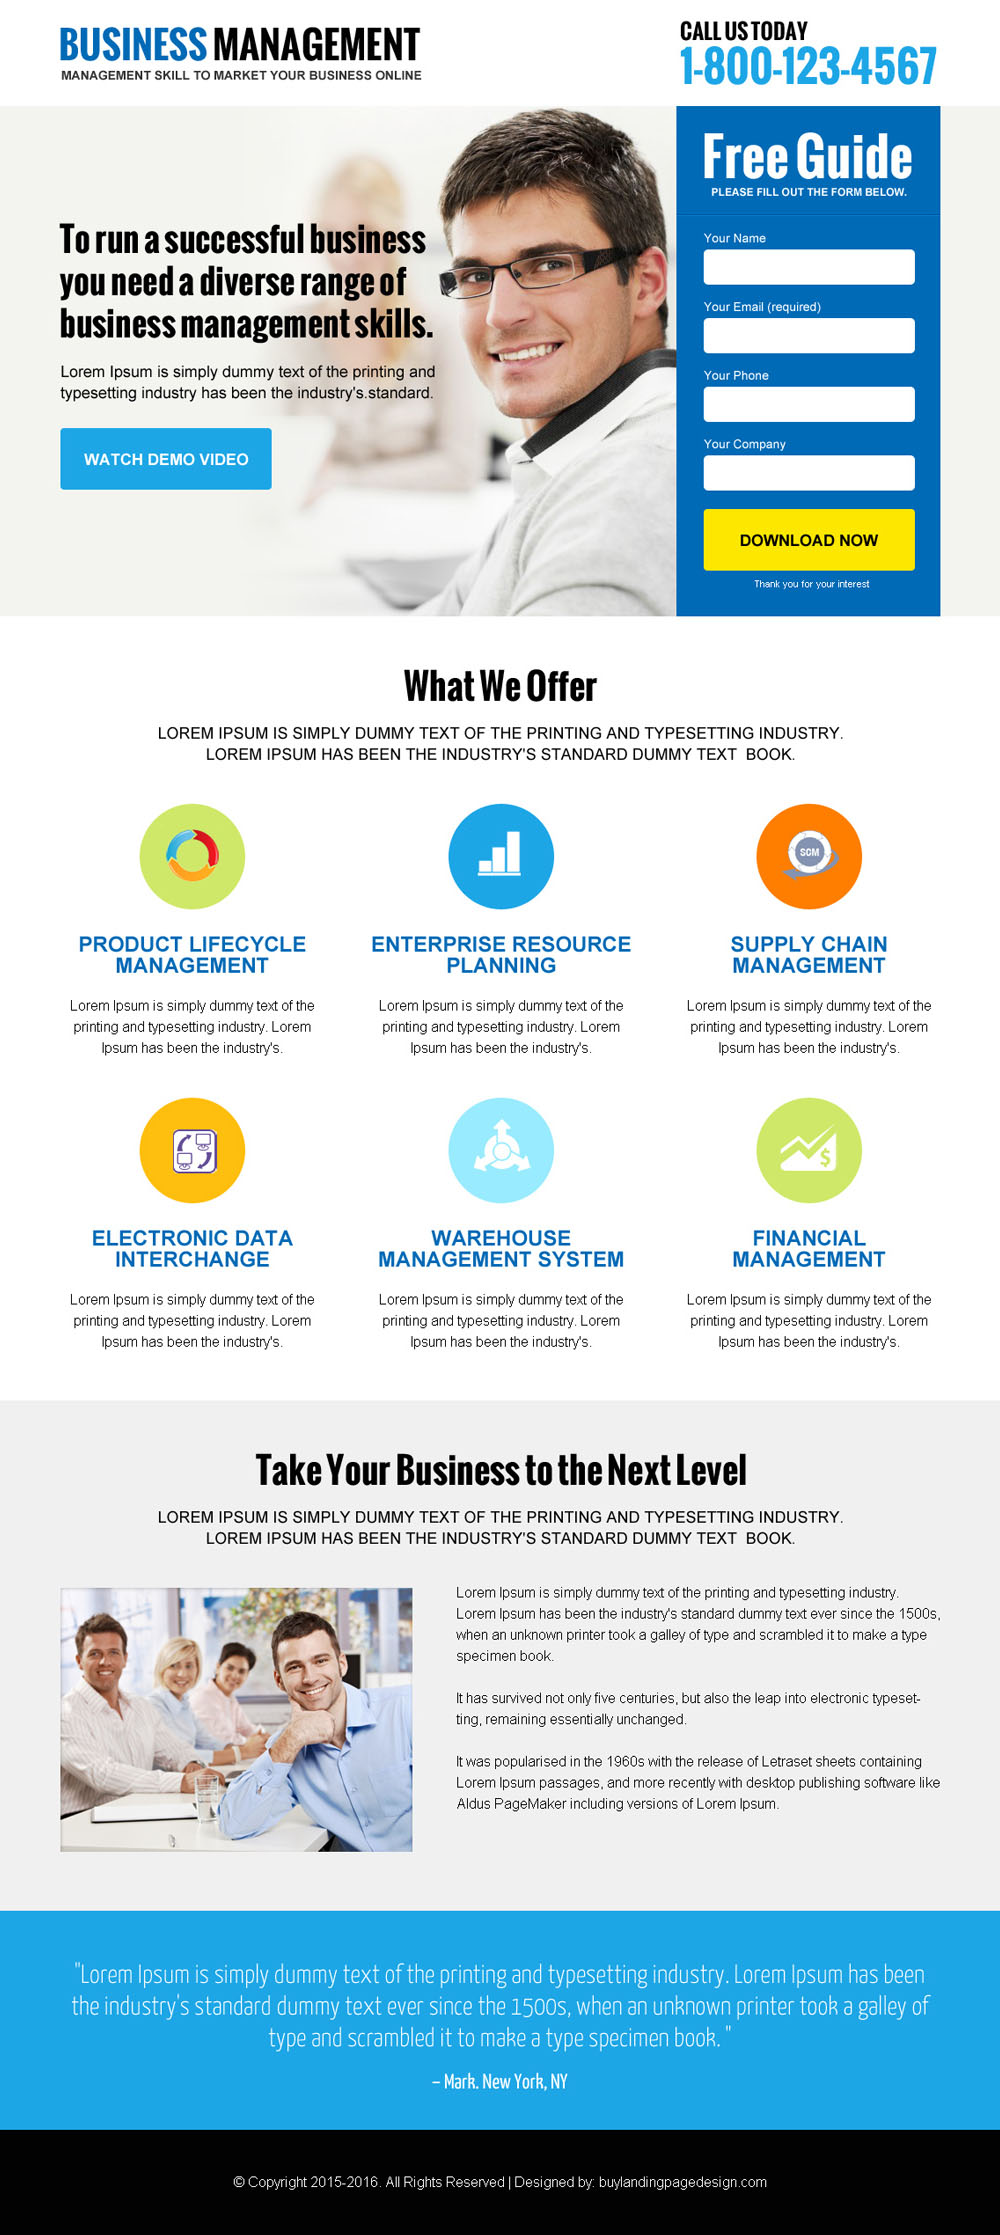 online-business-management-lead-gen-landing-page-to-market-your-business-032